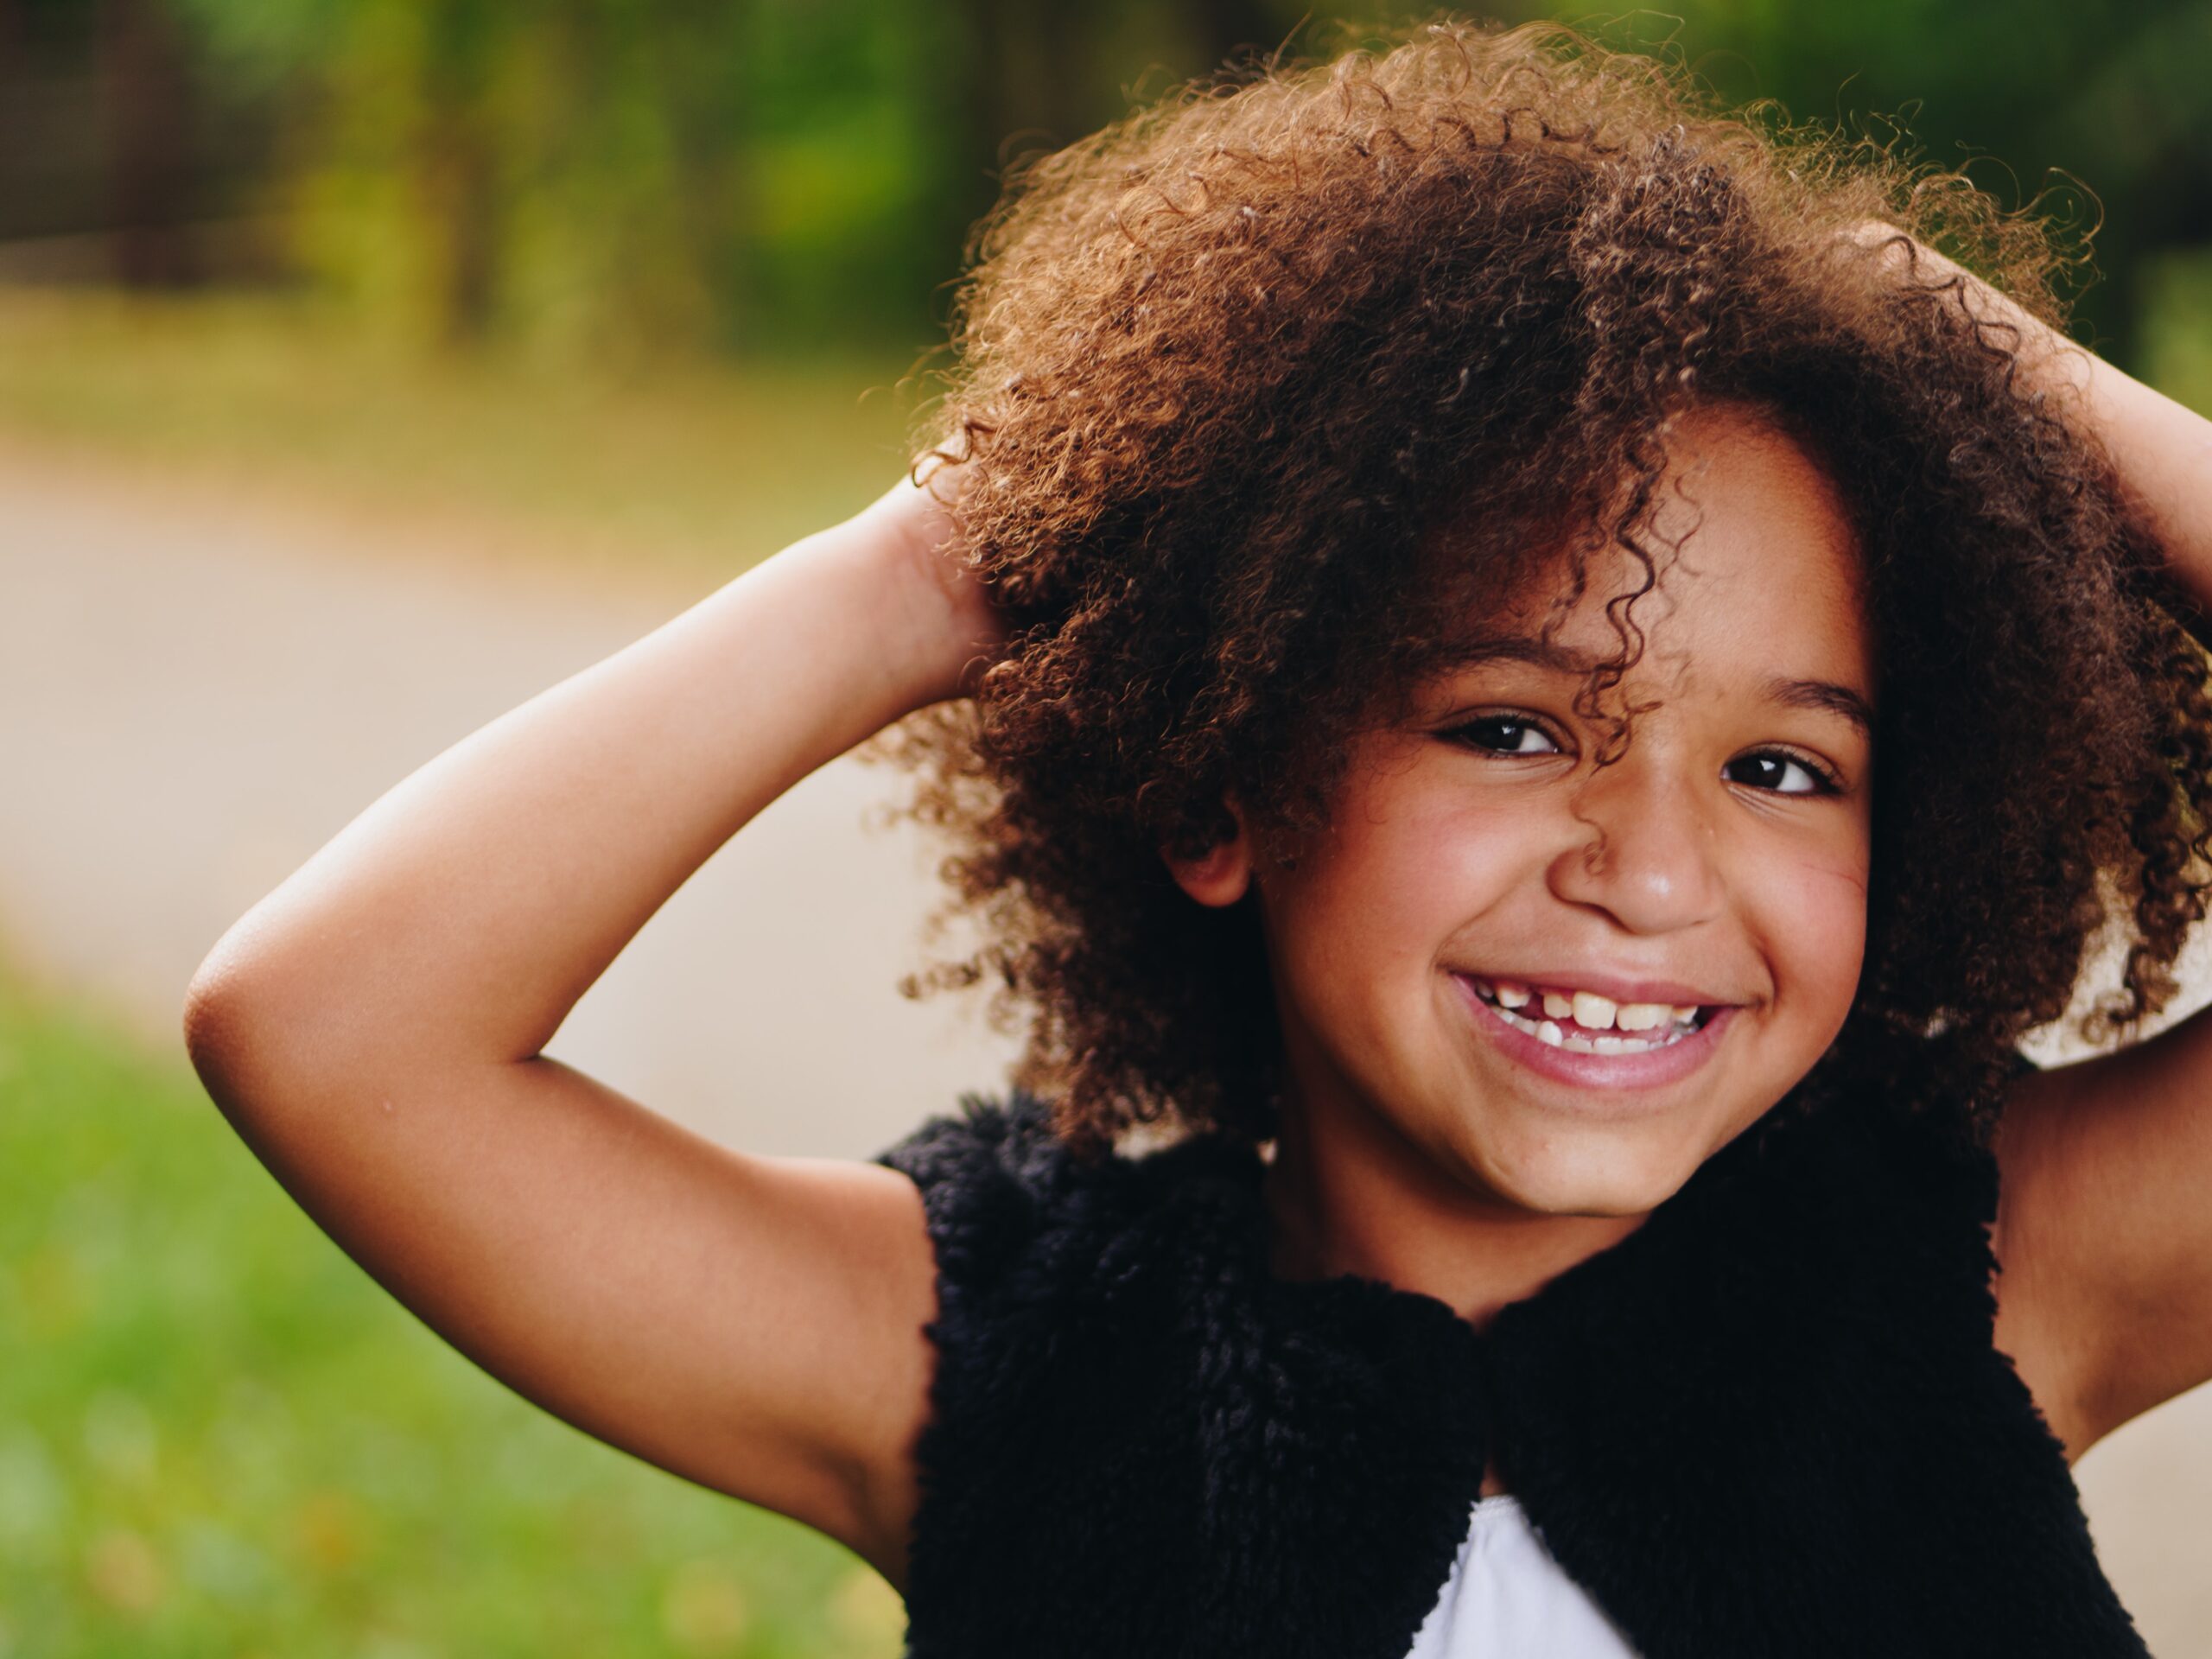 Tips for Raising a Body Confident Child